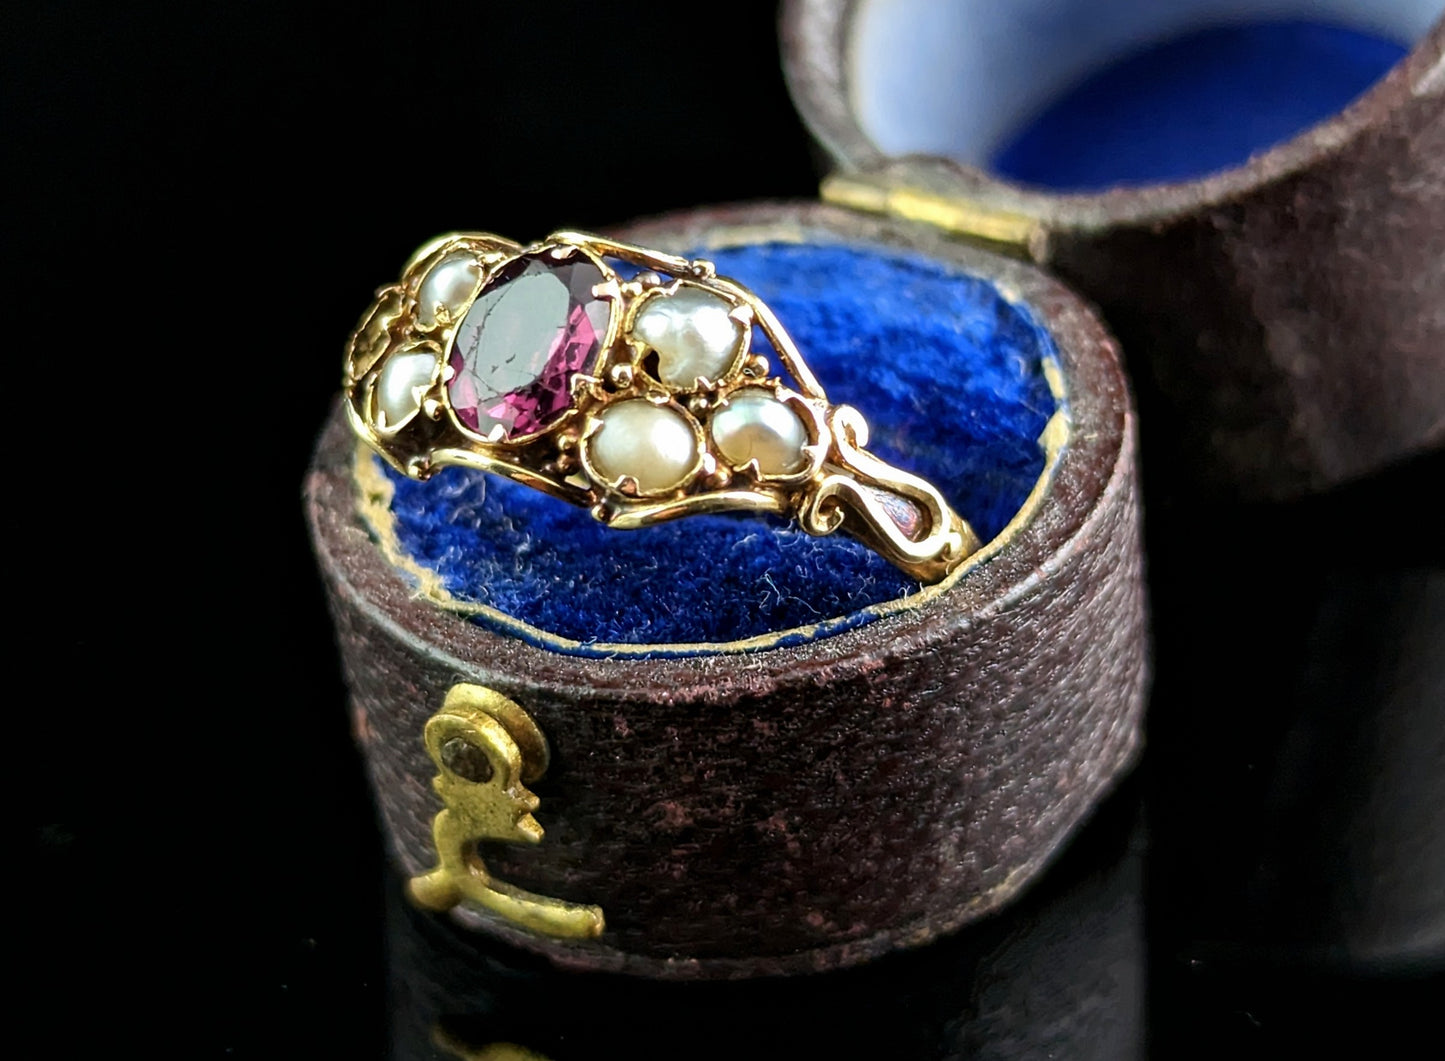 Antique Almandine Garnet and Pearl ring, 22ct gold, early Victorian